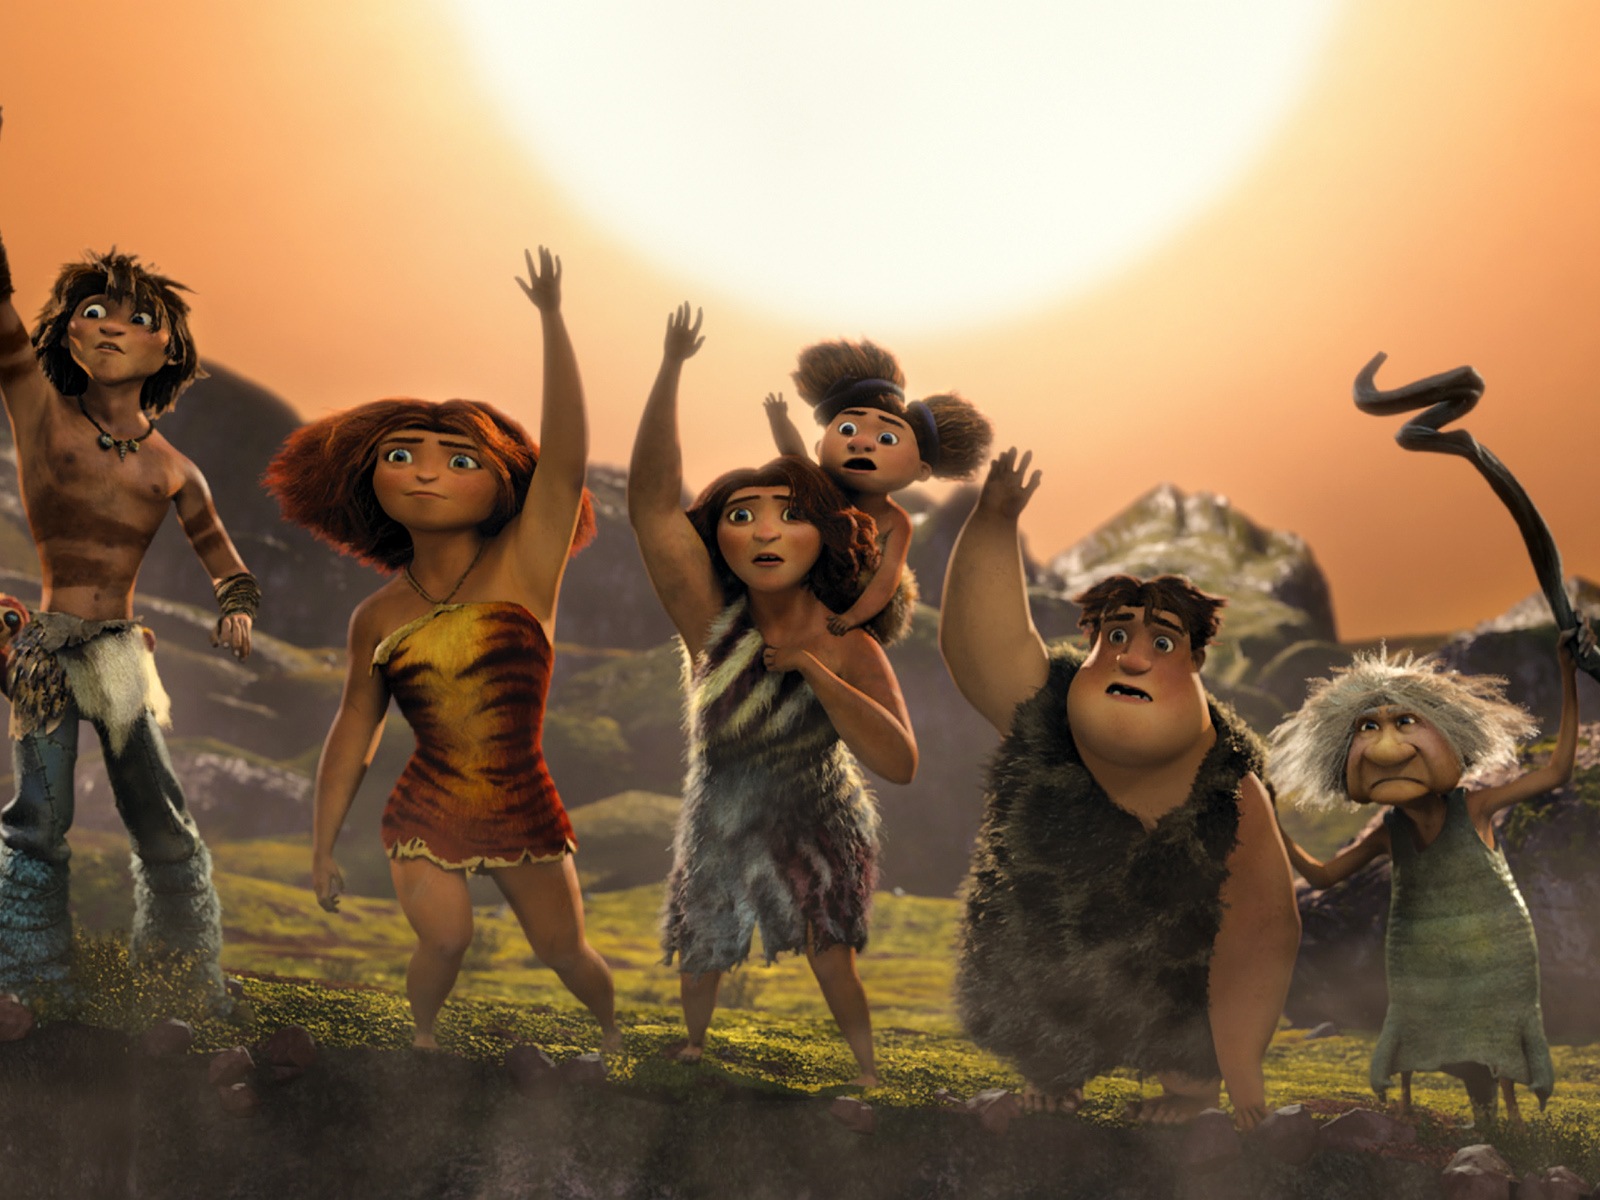 V Croods HD Movie Wallpapers #4 - 1600x1200